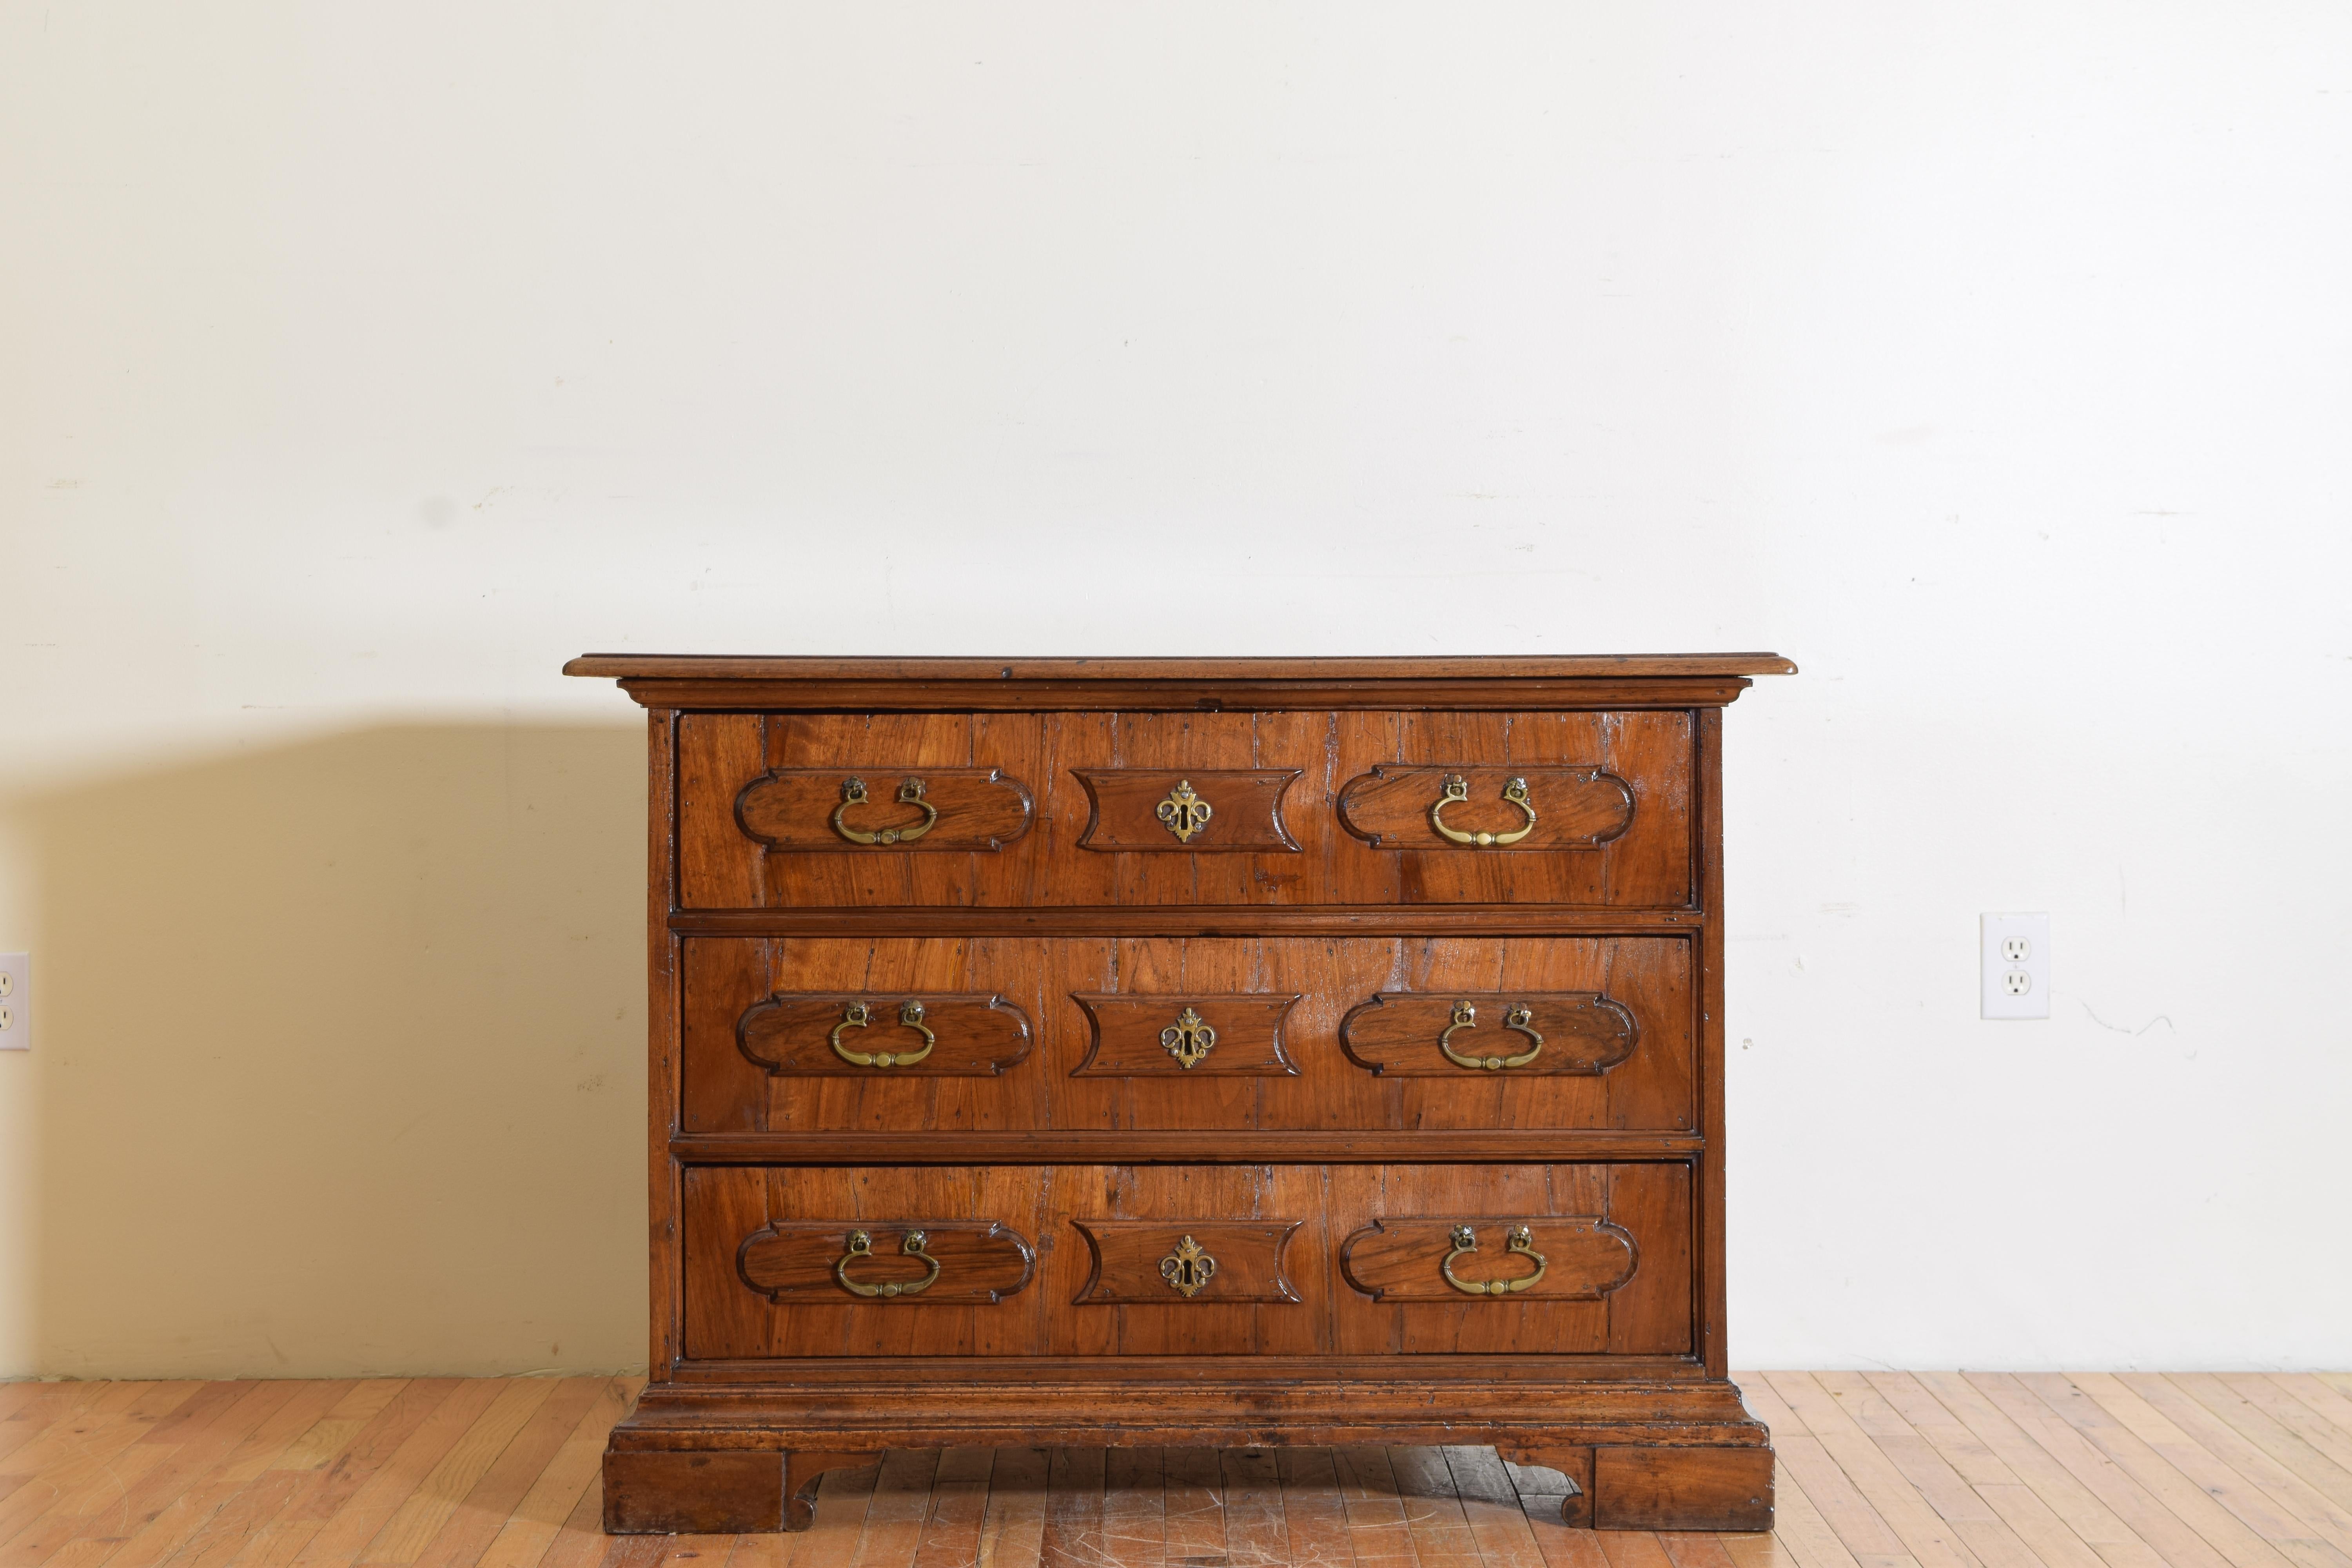 Having a wonderful polished veneered patina with bronze hand pulls and escutcheons, this three-drawer commode has raised panels on the sides as well as on the drawer fronts.  Raised on a hand-carved plinth base.